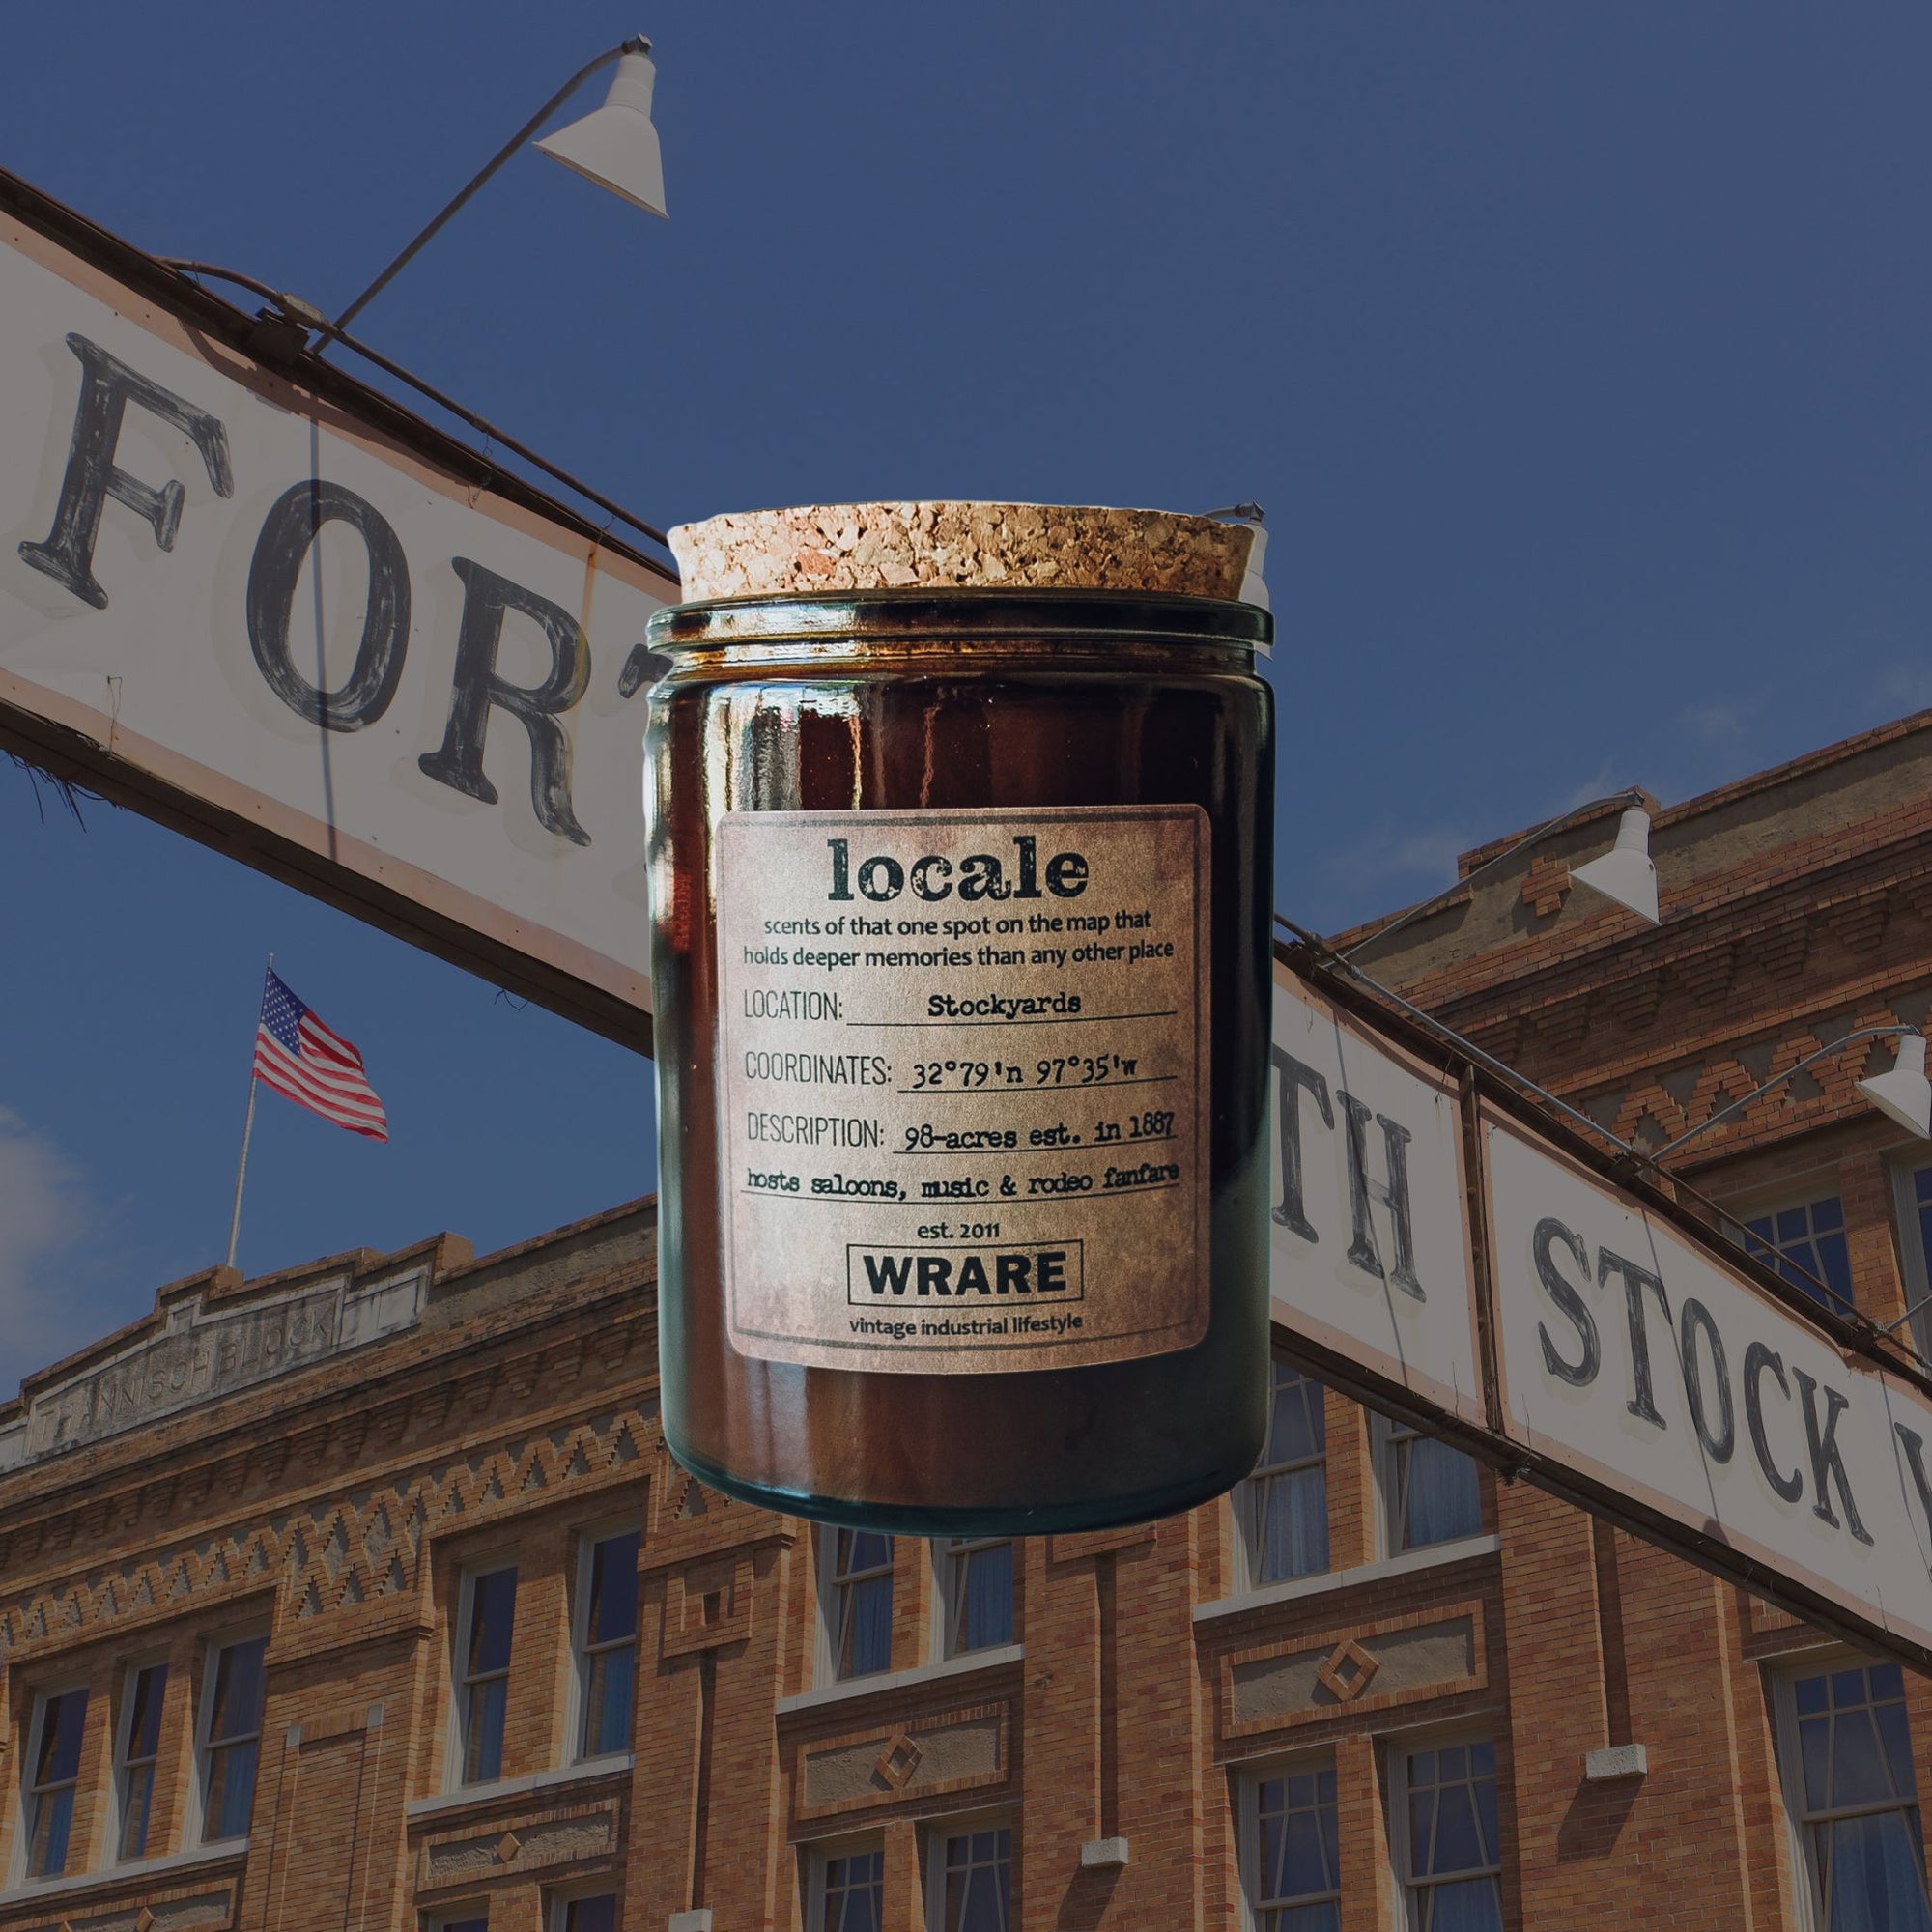 Stockyards - locale by WRARE